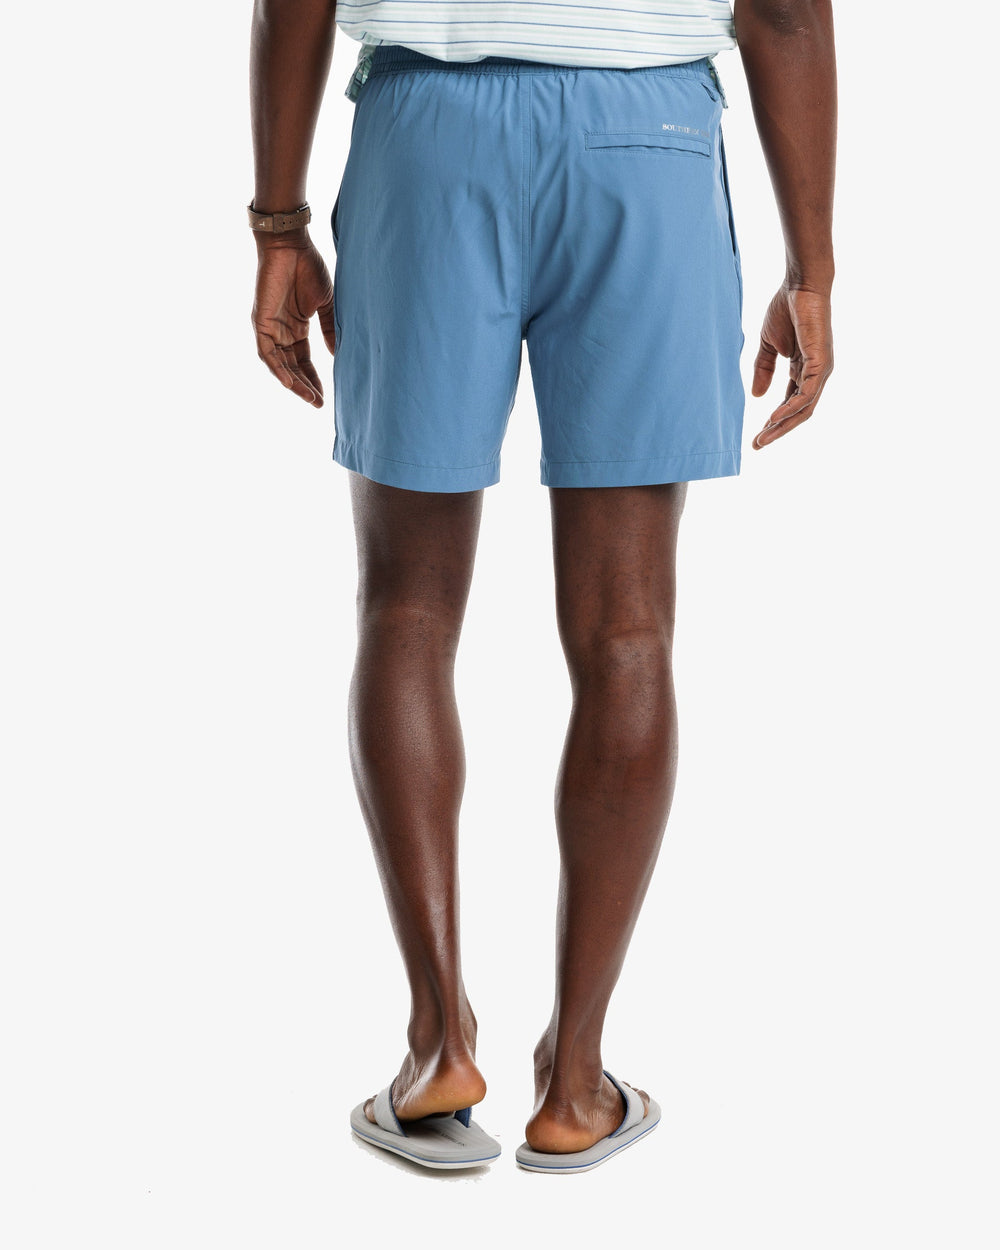 The model back view of the Men's Rip Channel 6 Inch Performance Short by Southern Tide - Blue Ridge